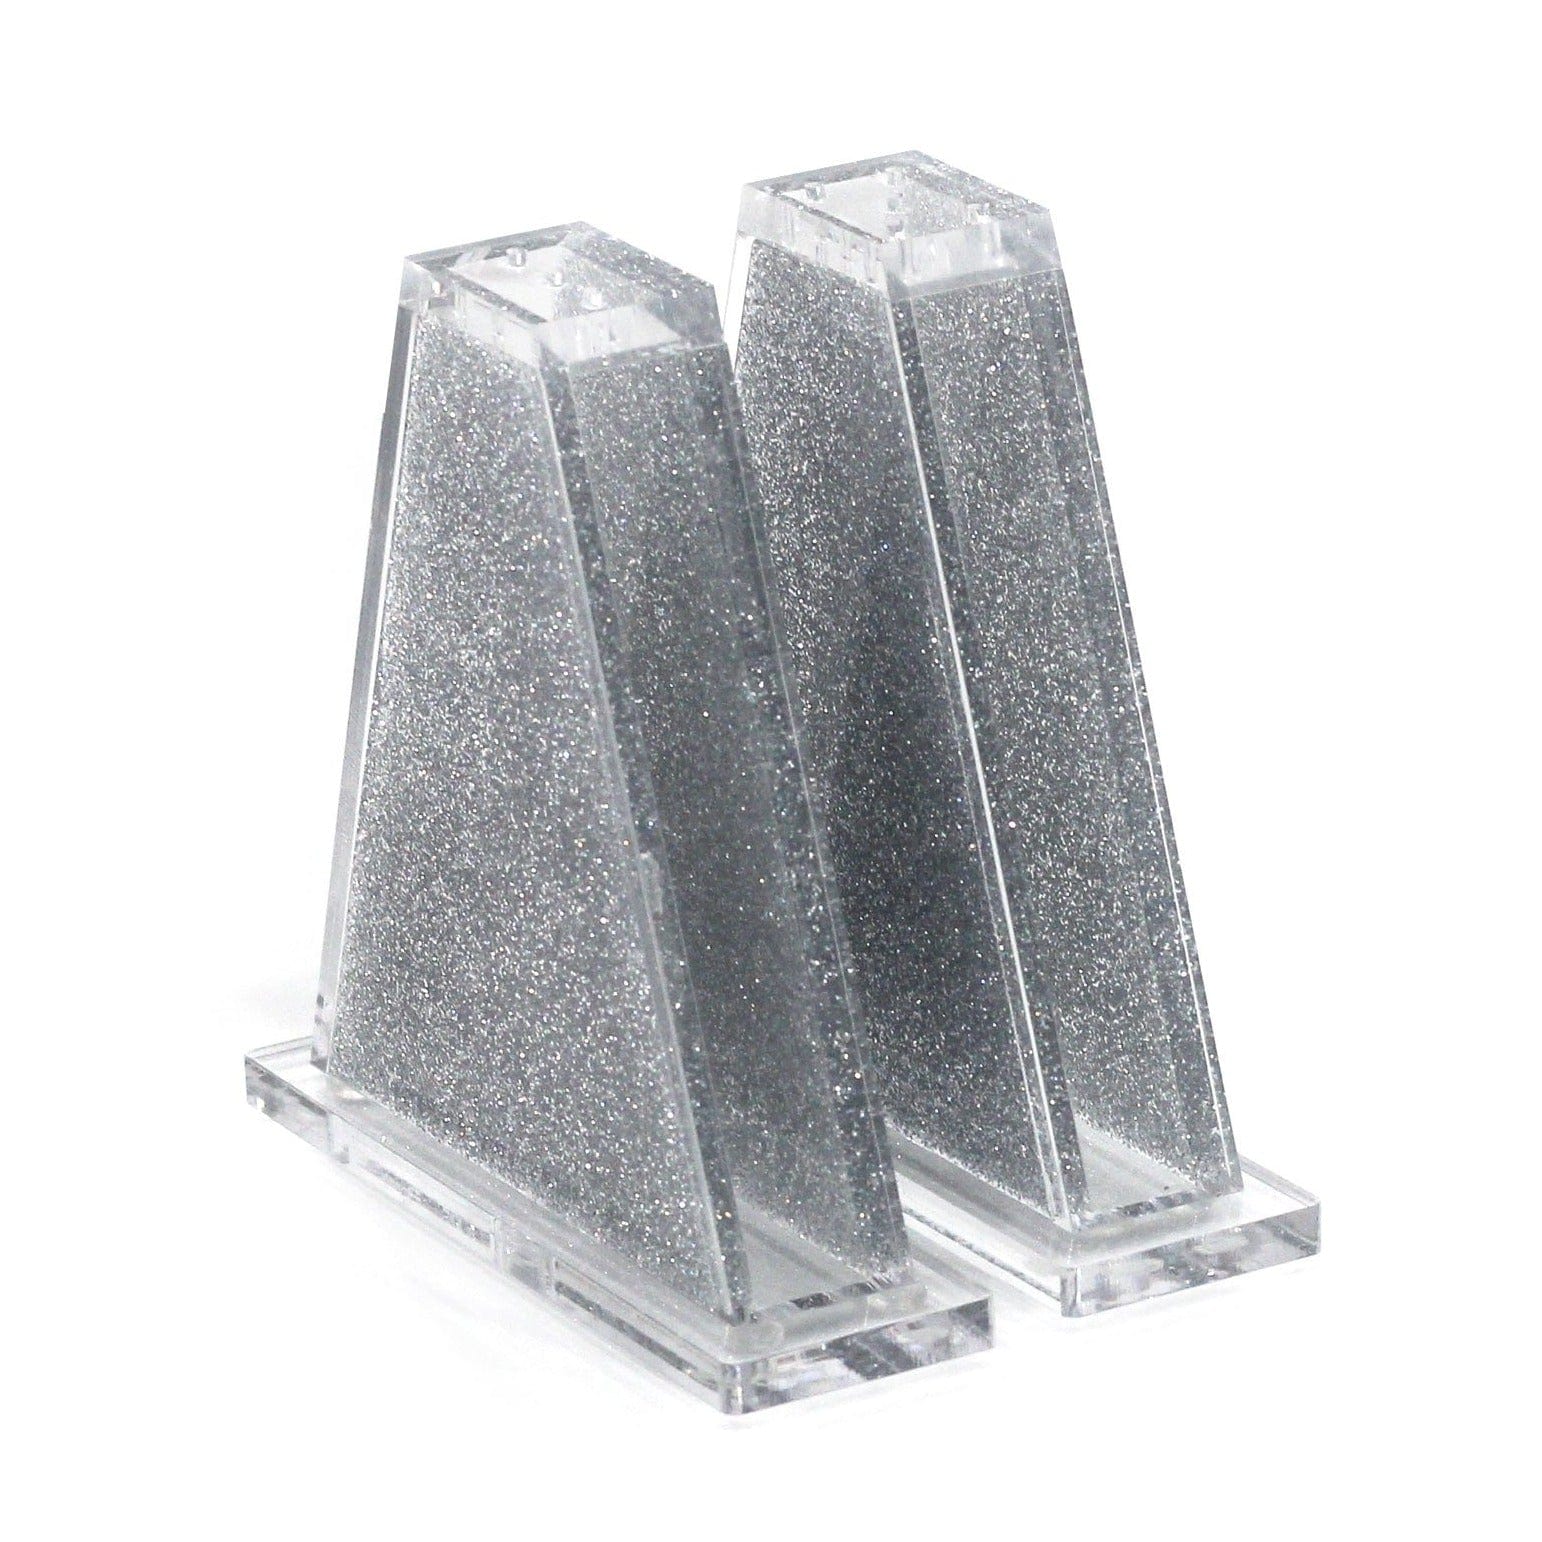 Triangle Salt Shakers - Waterdale Collection